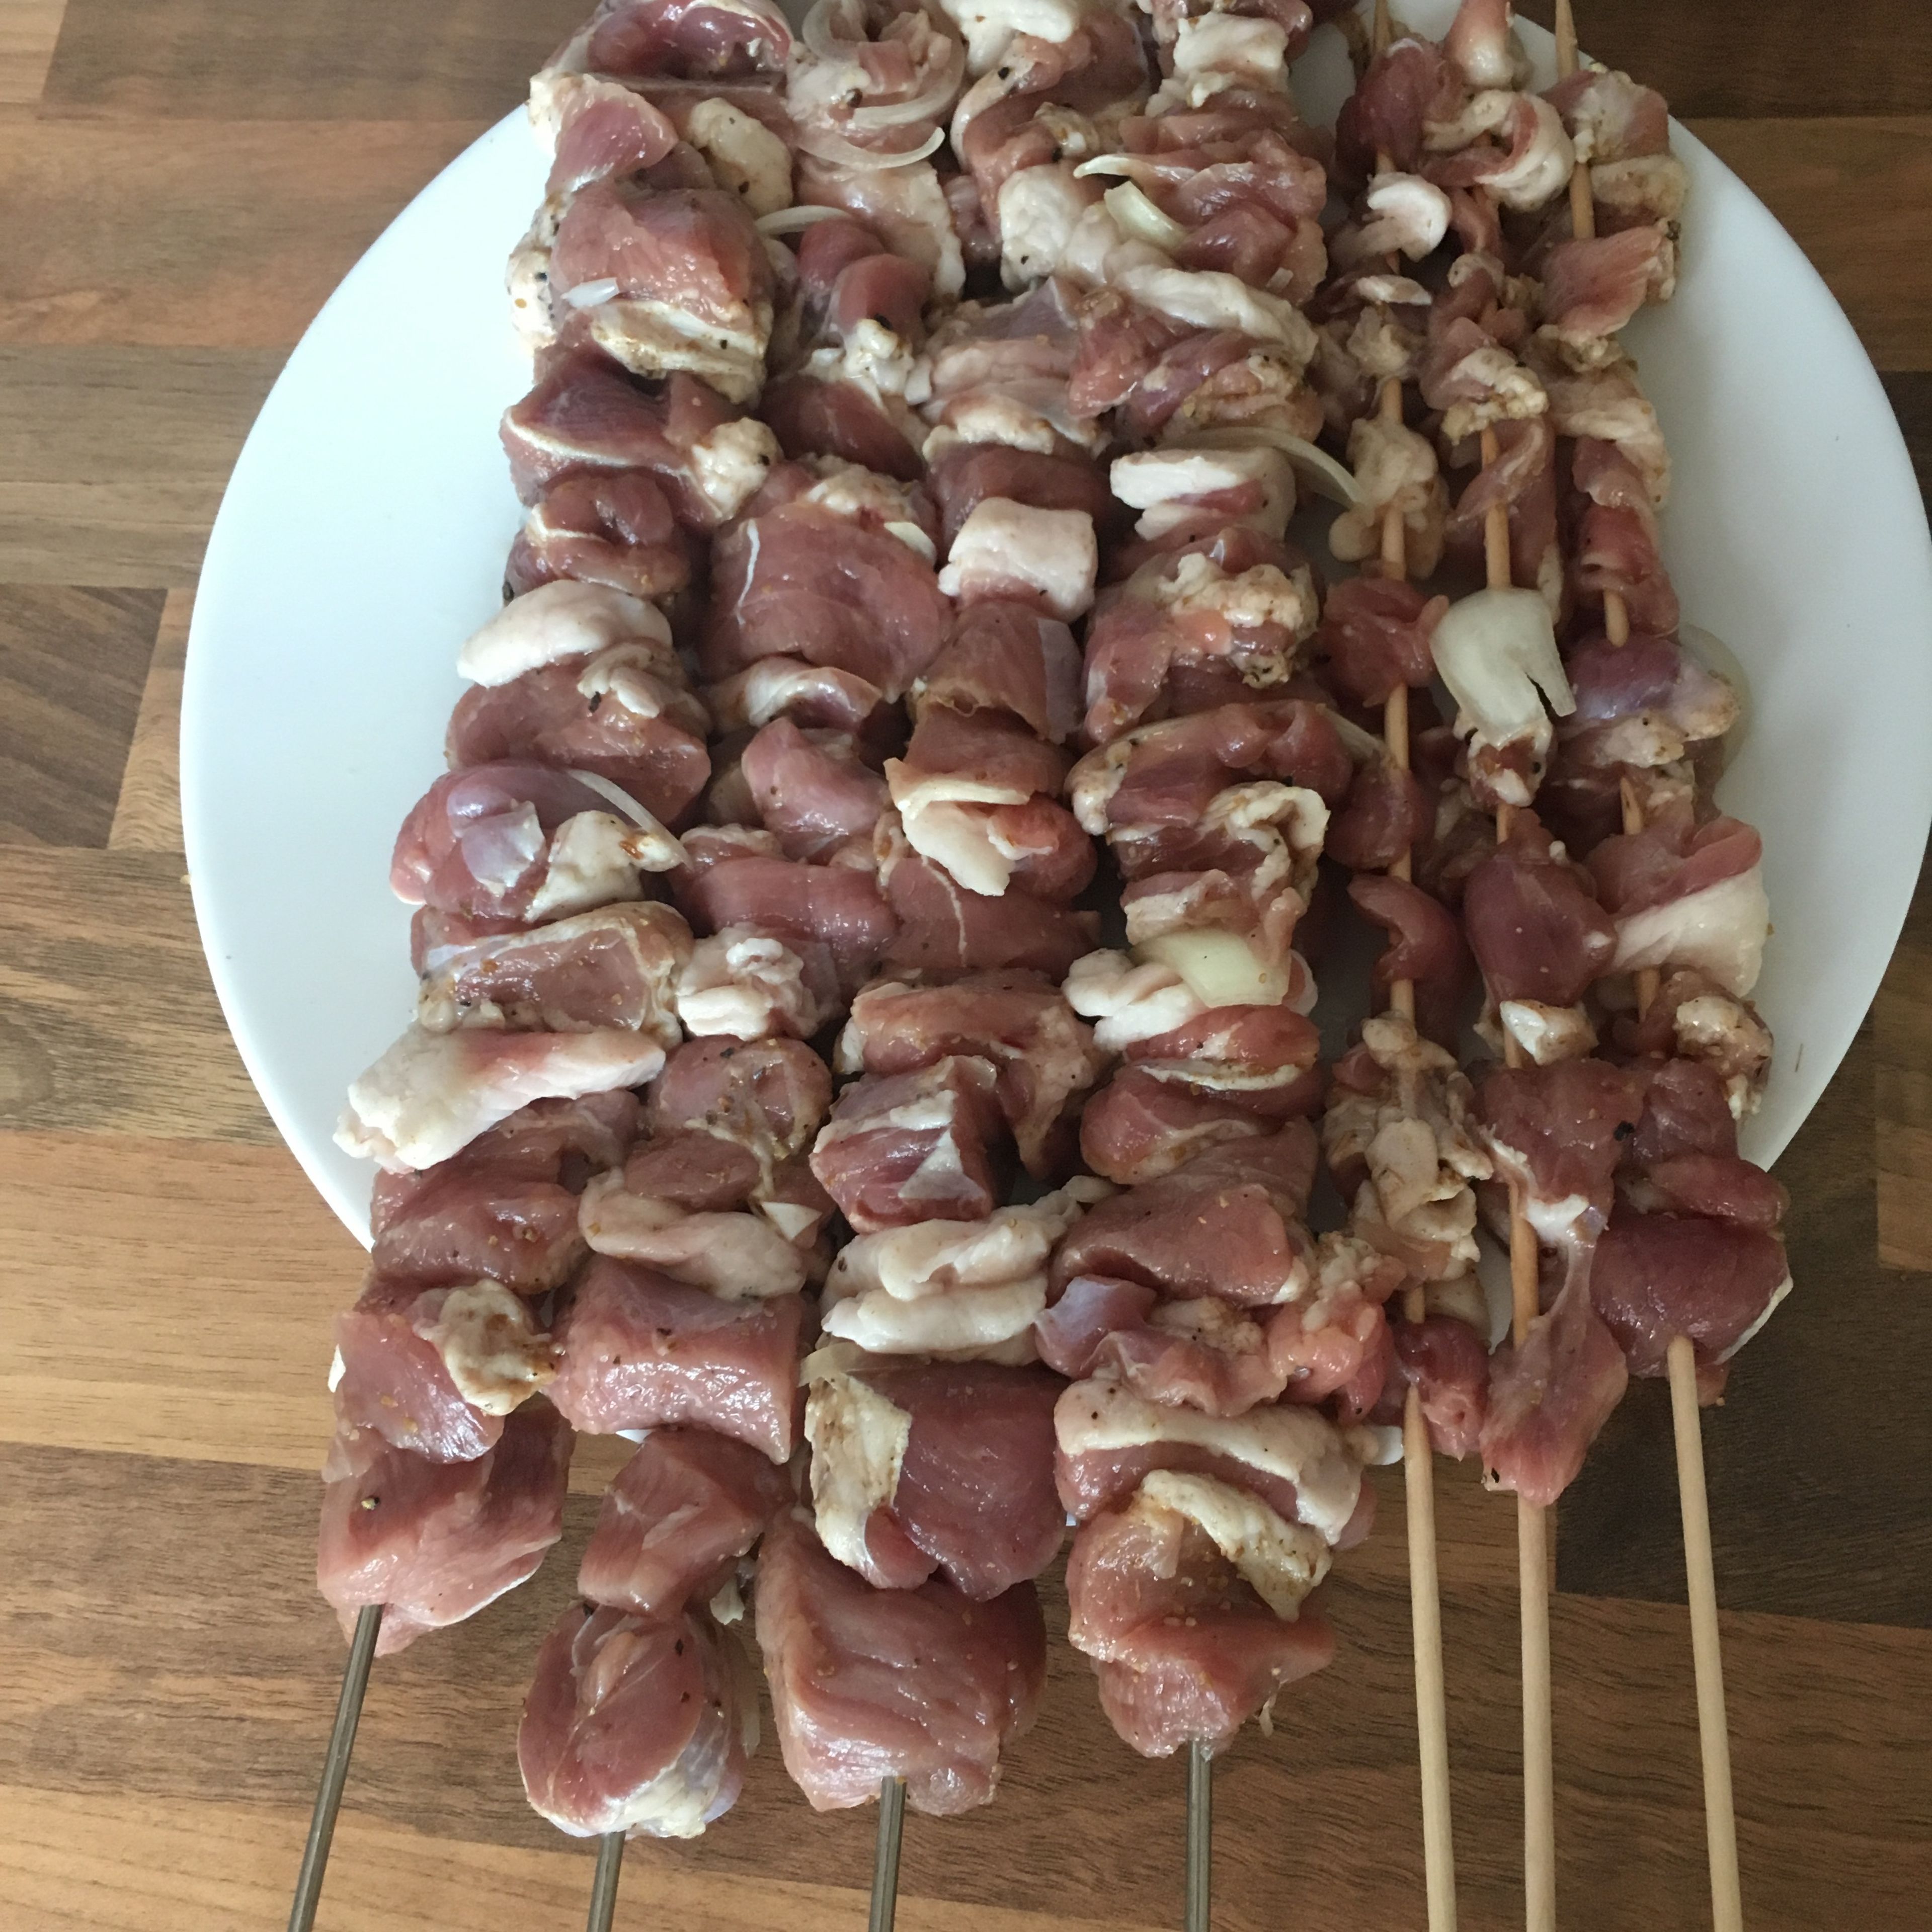 Tread the lamb cubes onto the skewers.